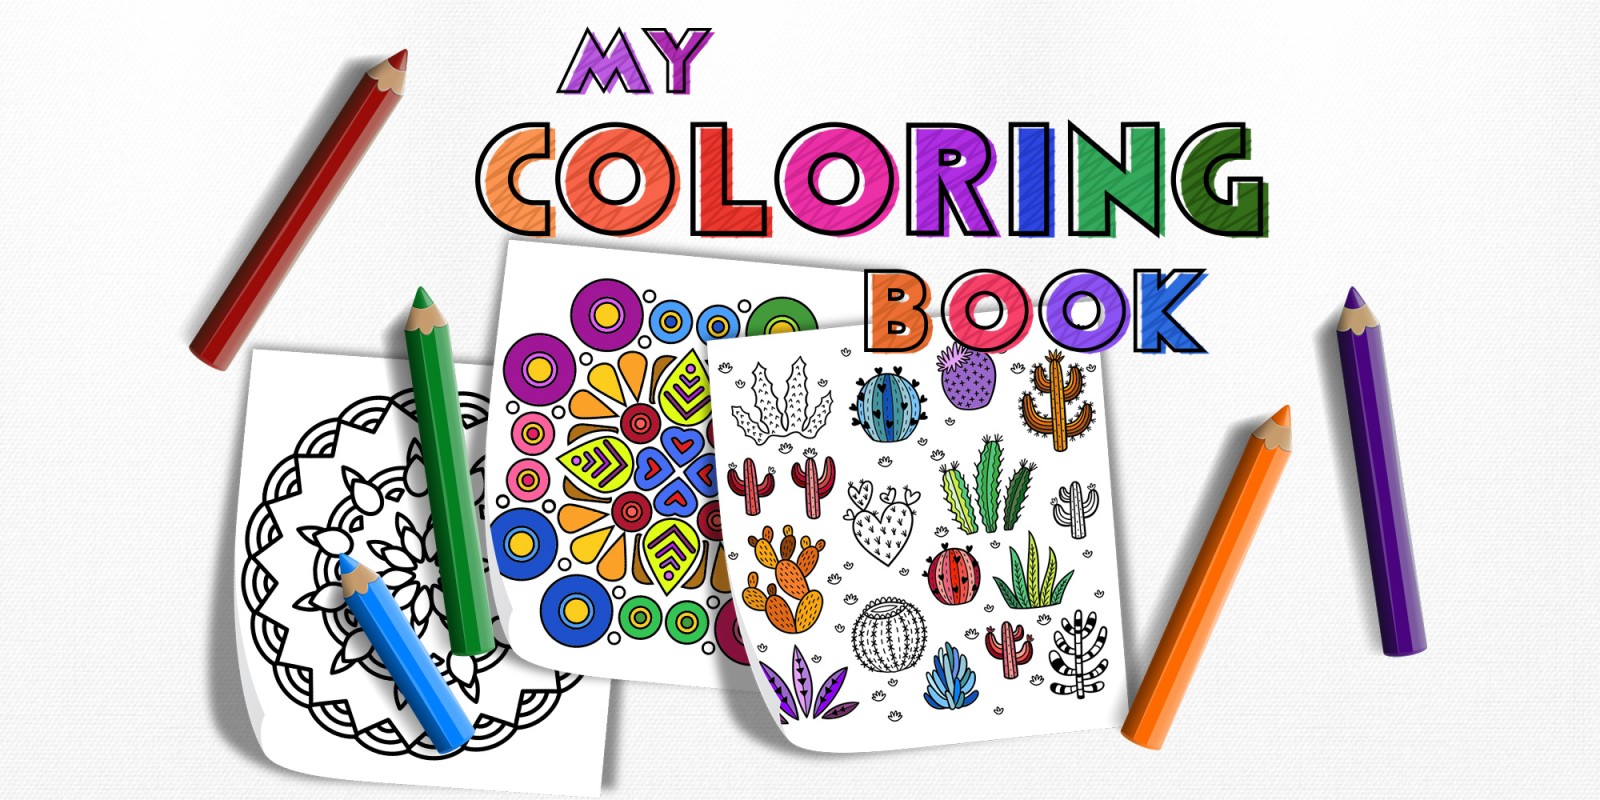 My Coloring Book | Nintendo Switch download software | Games | Nintendo